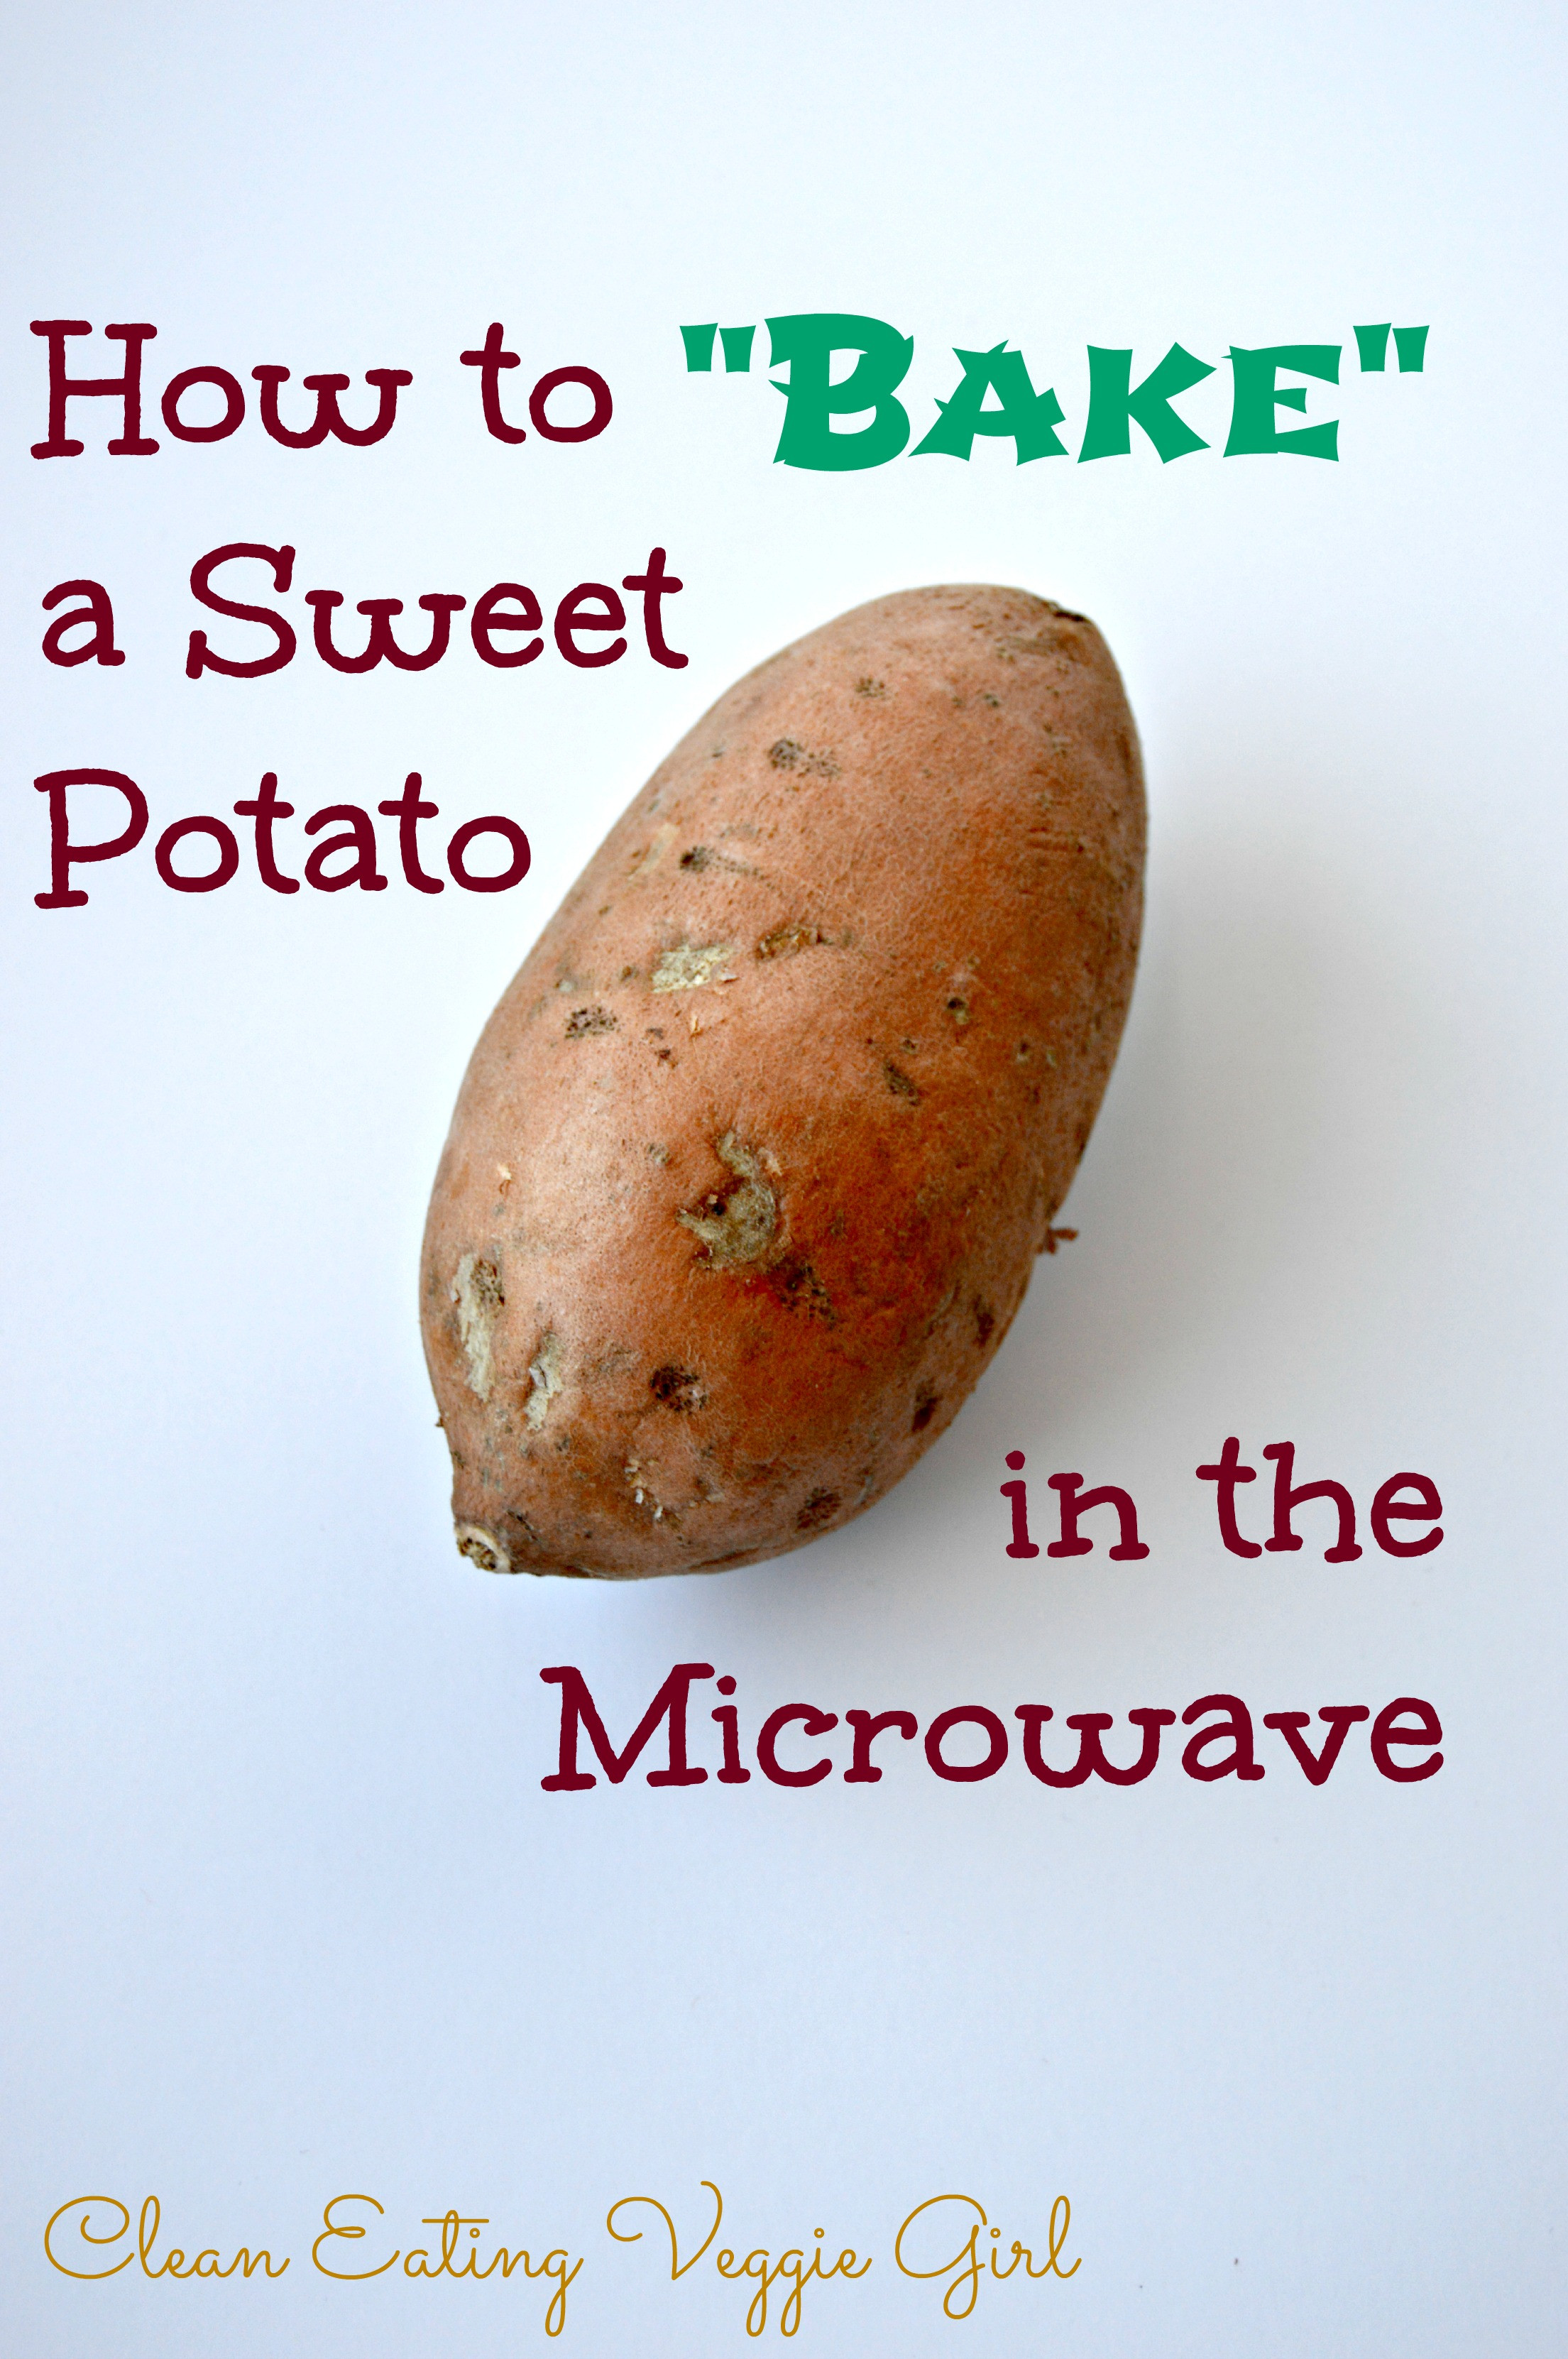 How Long To Bake Potato In Microwave
 How to Make a Baked Sweet Potato in the Microwave Clean